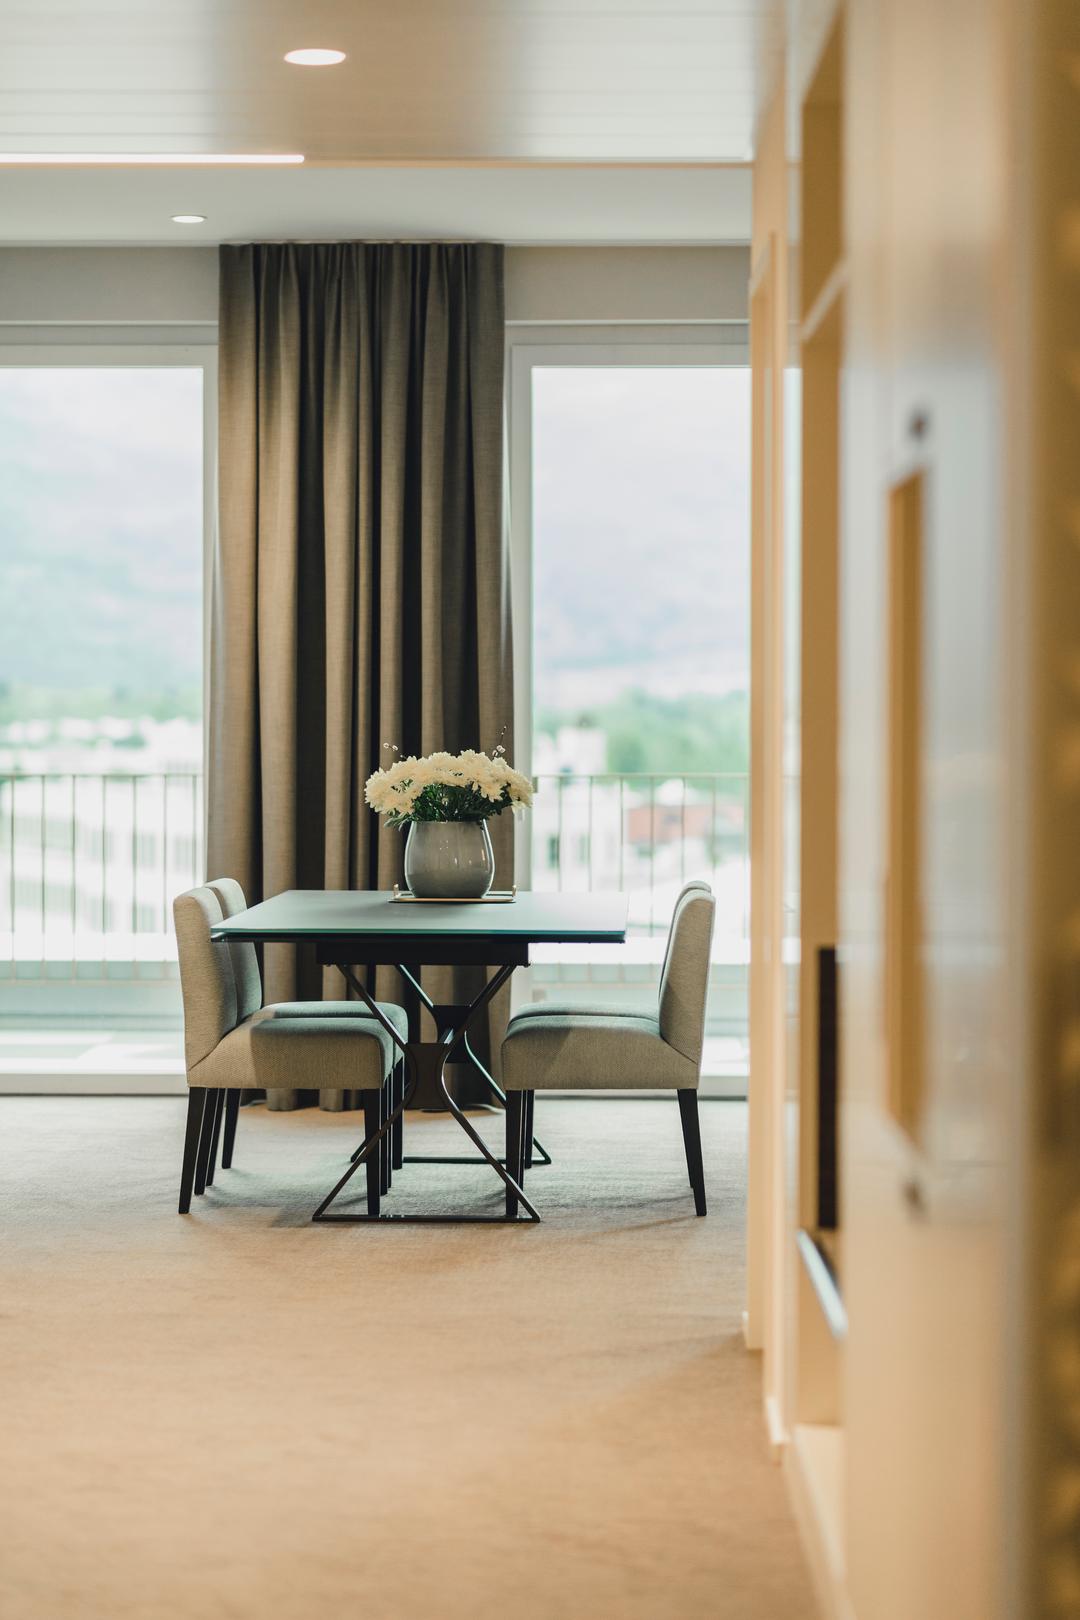 Residence Hotel Vaduz Boutique Suite with view over Liechtenstein and the Swiss mountains. Luxury Hotel central Vaduz. Best Hotel Liechtenstein.